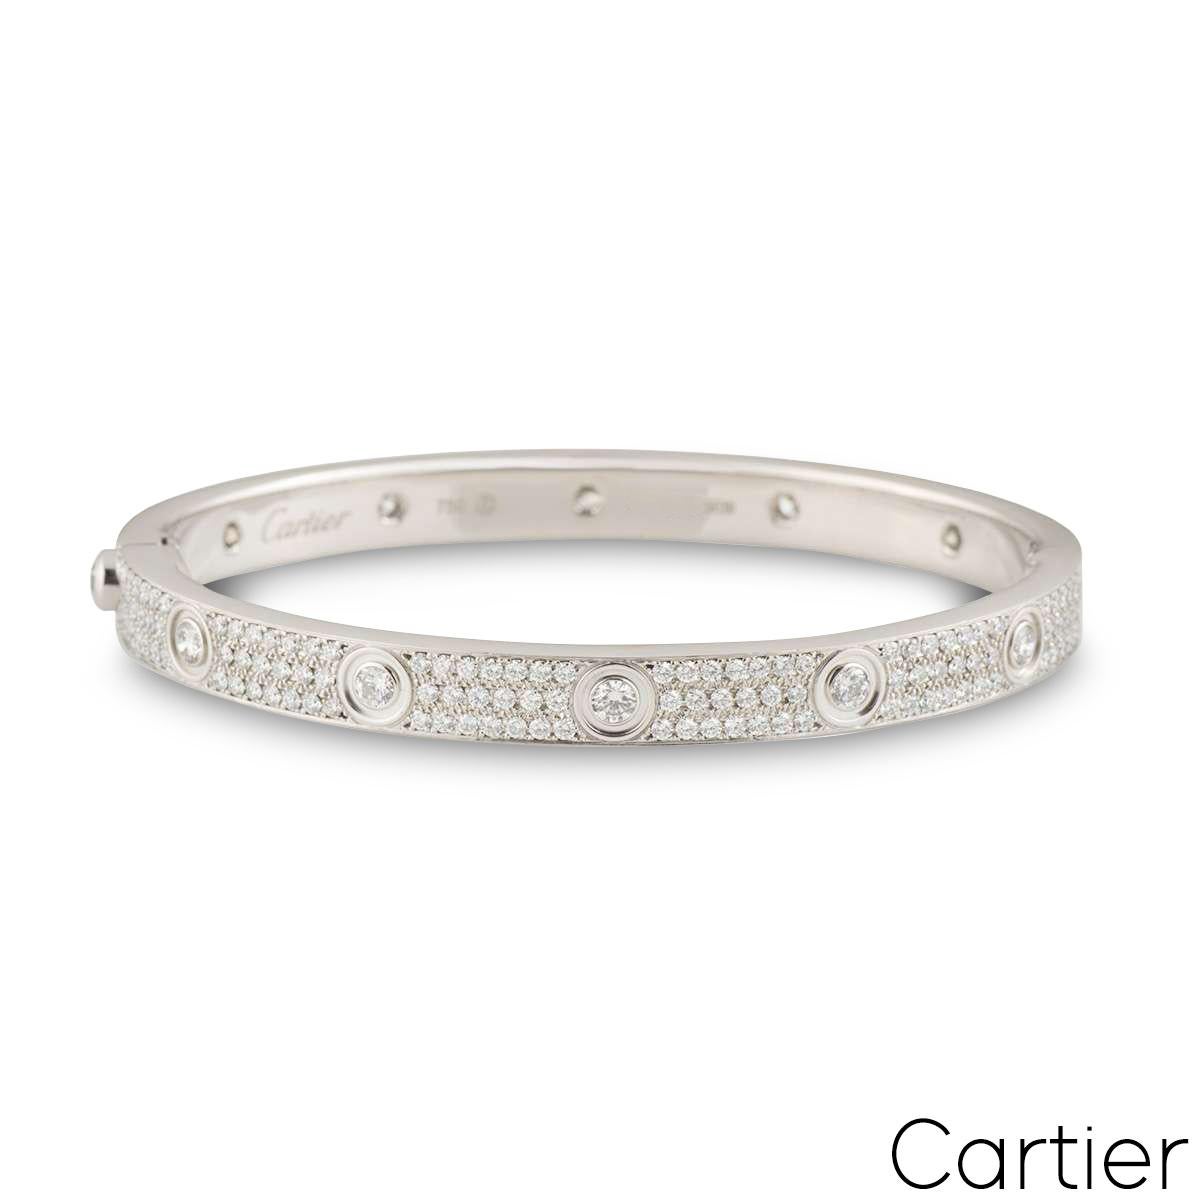 An amazing 18k white gold diamond bracelet by Cartier, from the Love collection. The bracelet has 12 round brilliant cut diamonds around the outer edge and 216 round brilliant cut diamonds pave set between the iconic screw motif design, with an